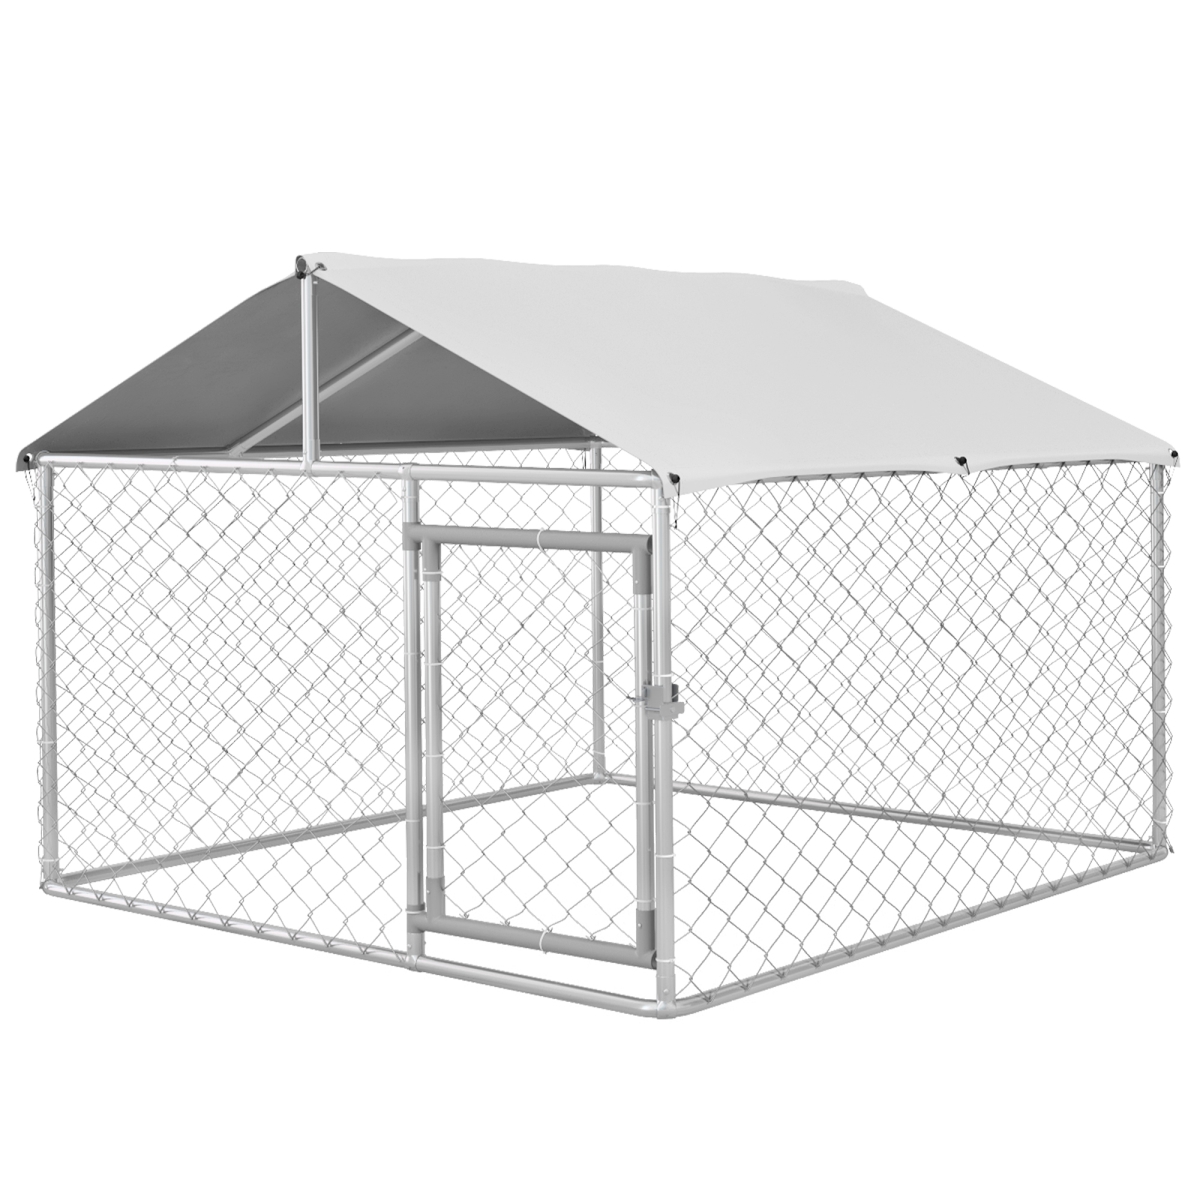 Picture of 212 Main D02-178V00SR 6.6 x 6.6 x 4.9 ft. PawHut Dog Kennel Outdoor for Small Medium Dogs with Waterproof Roof&#44; Silver